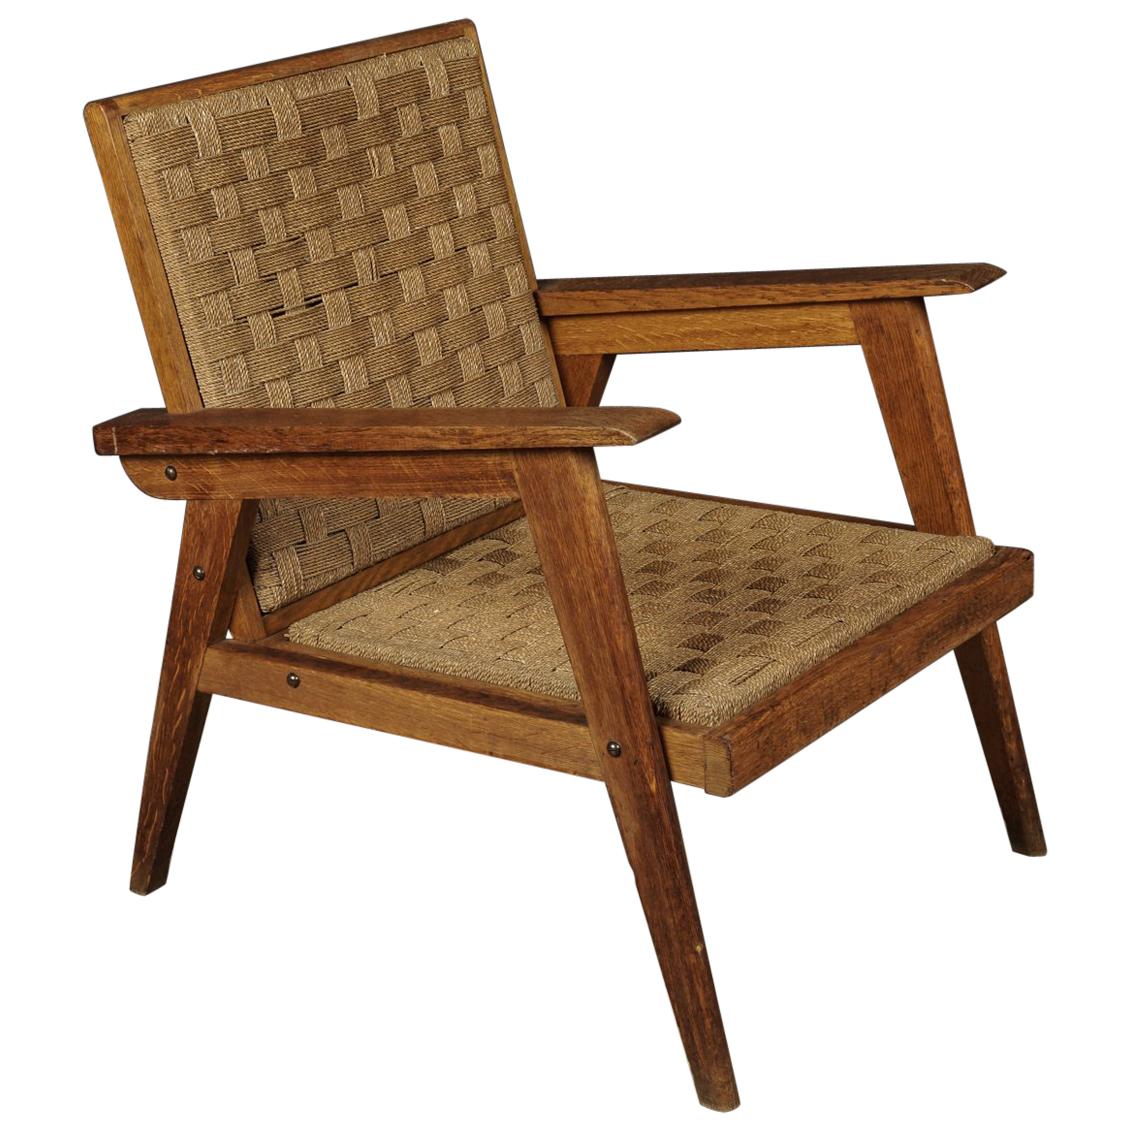 Midcentury Chair from France, circa, 1970